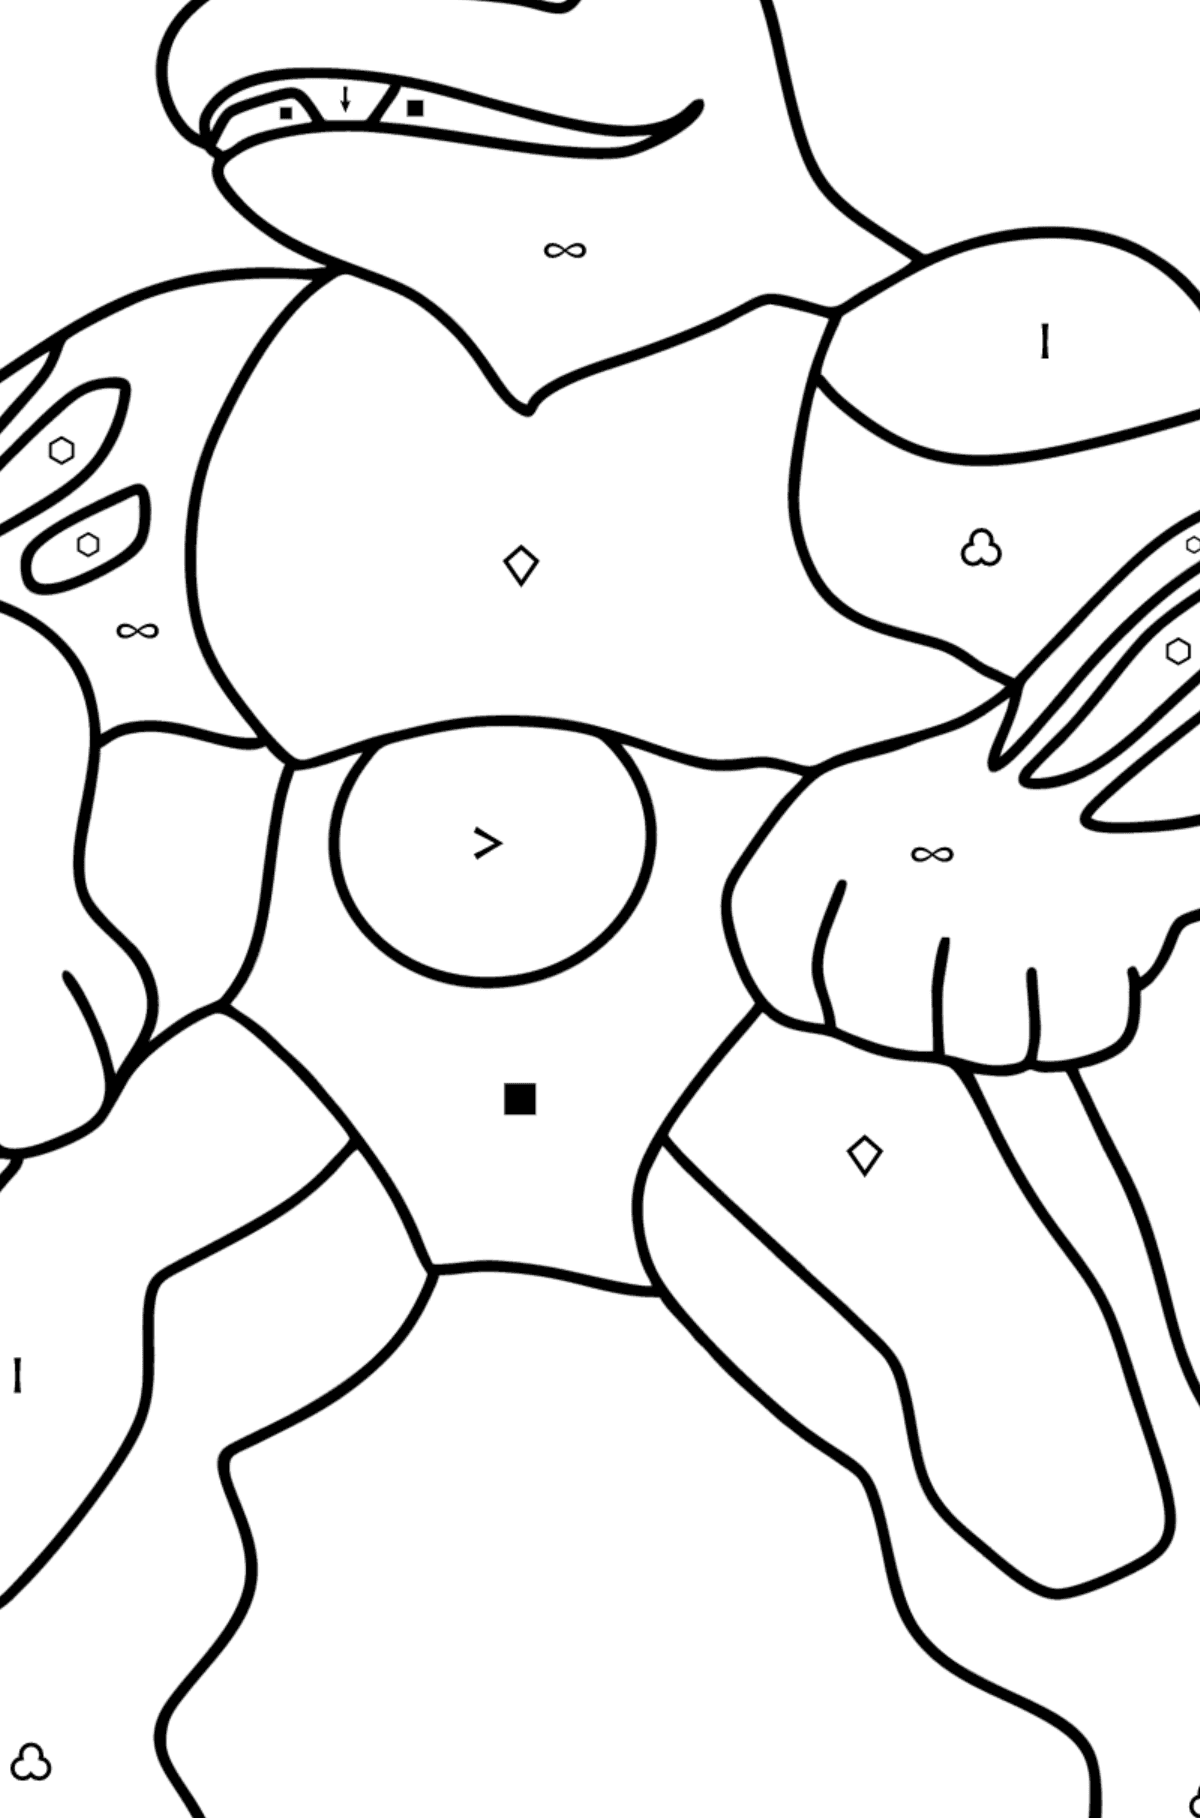 Coloring page Pokemon Go Machoke - Coloring by Symbols and Geometric Shapes for Kids